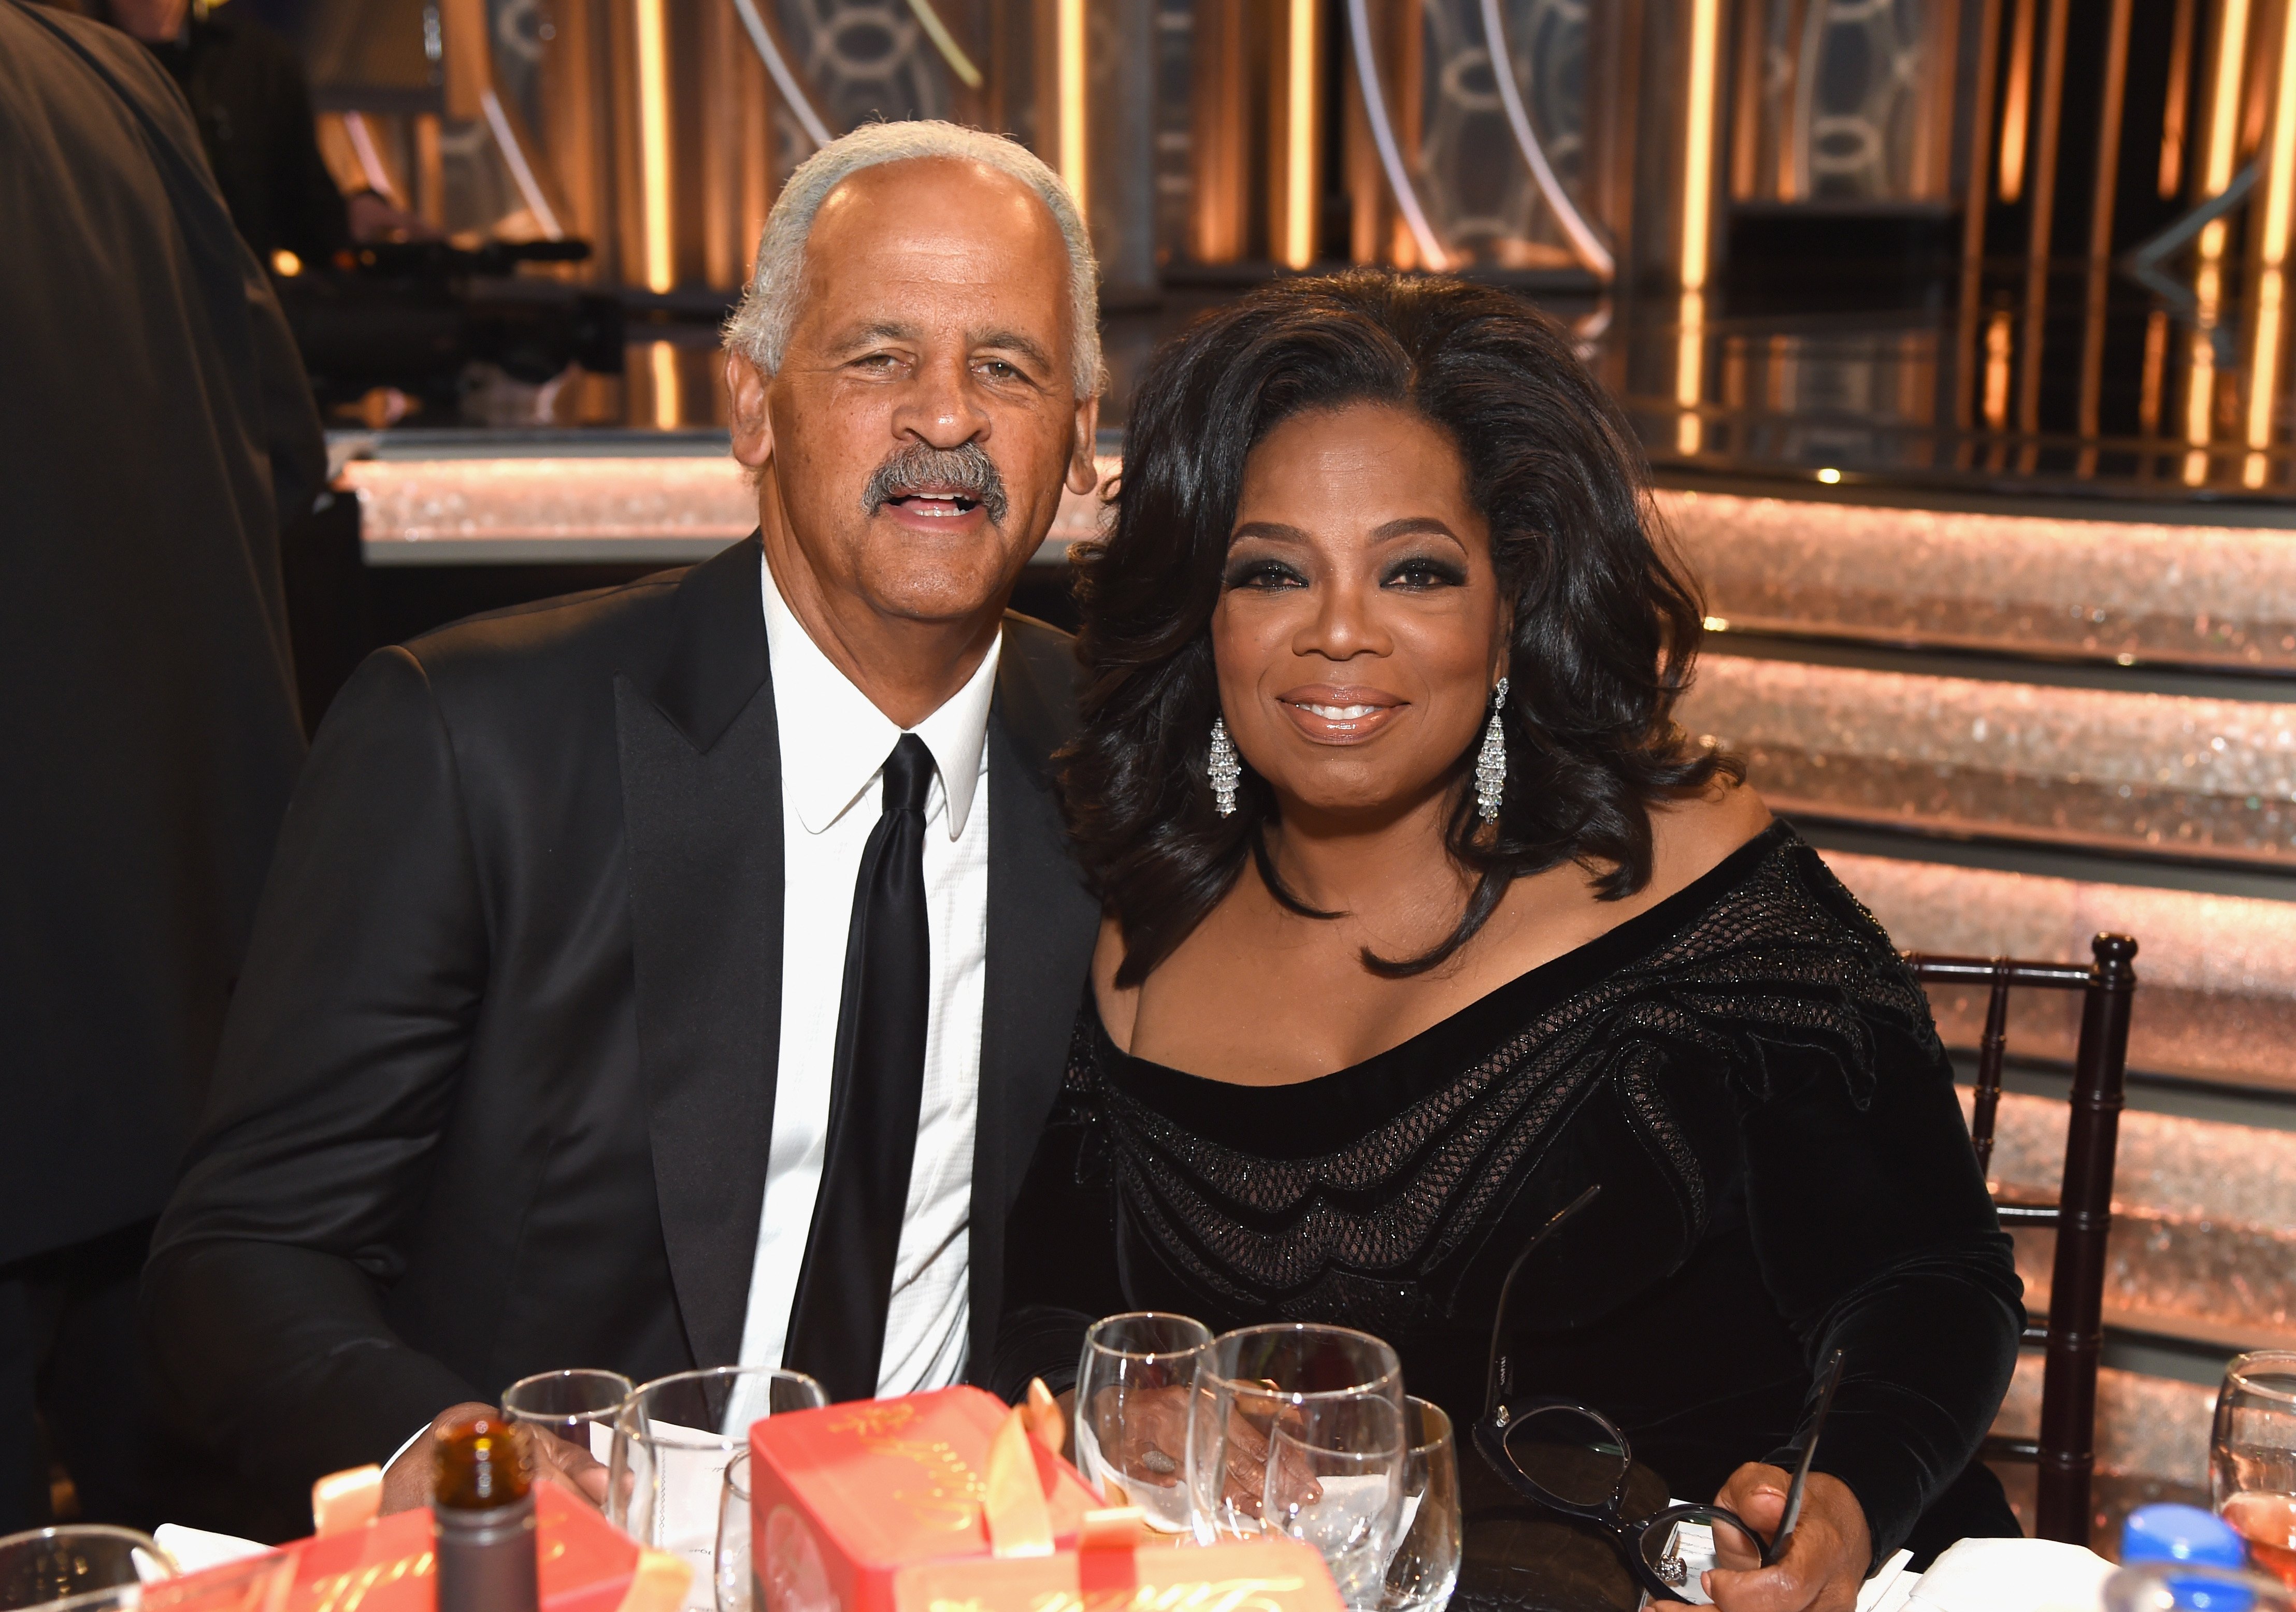 Stedman Graham and Oprah Winfrey at The 75th Annual Golden Globe Awards on January 7, 2018, in Beverly Hills, California l Source: Getty Images